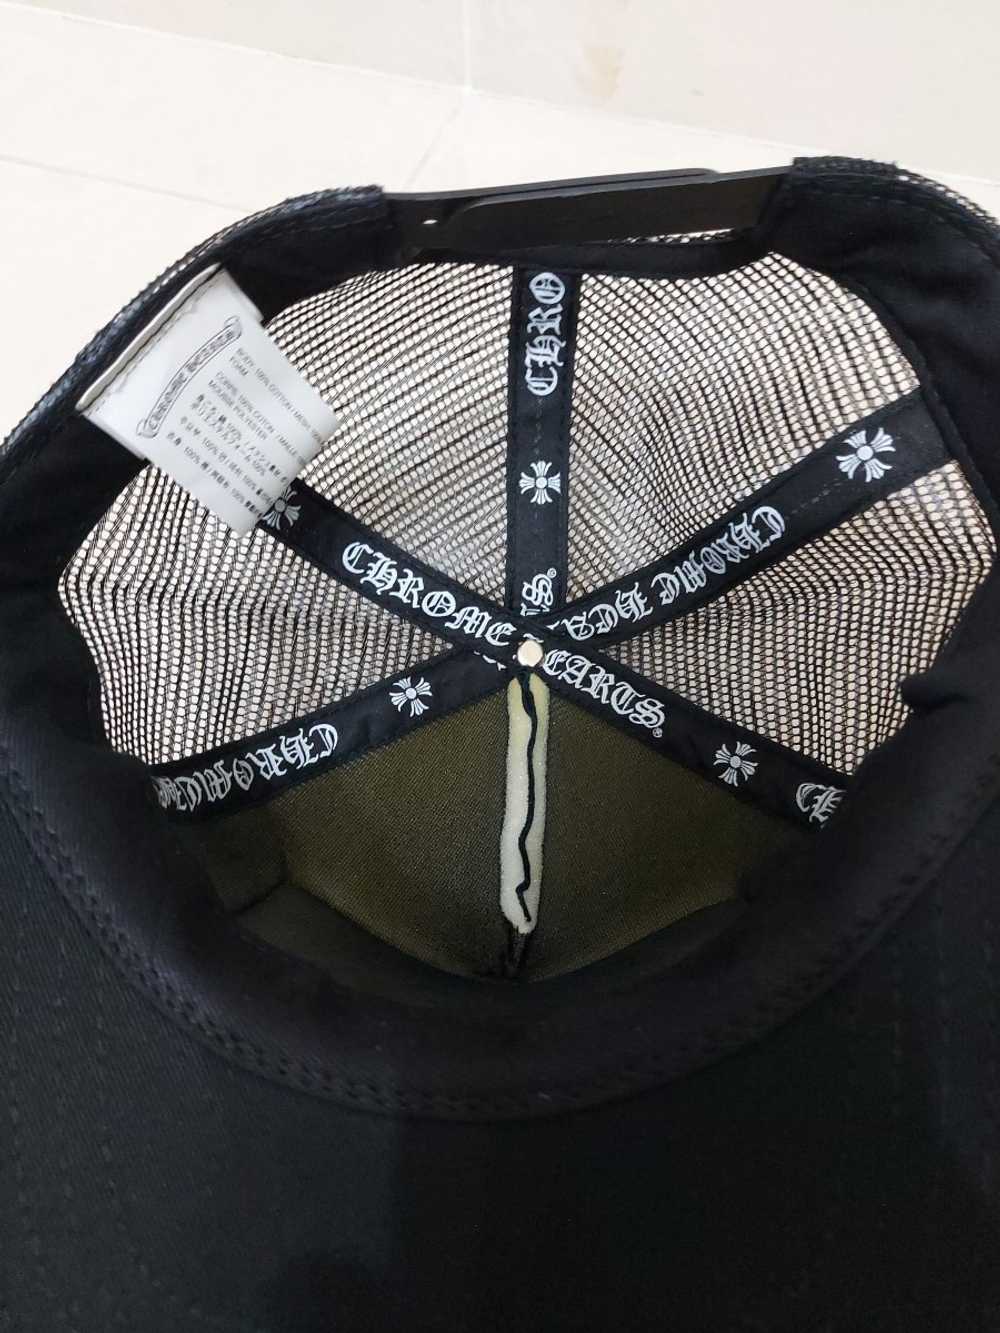 Chrome Hearts Black Hollywood USA CH Trucker Hat - image 3